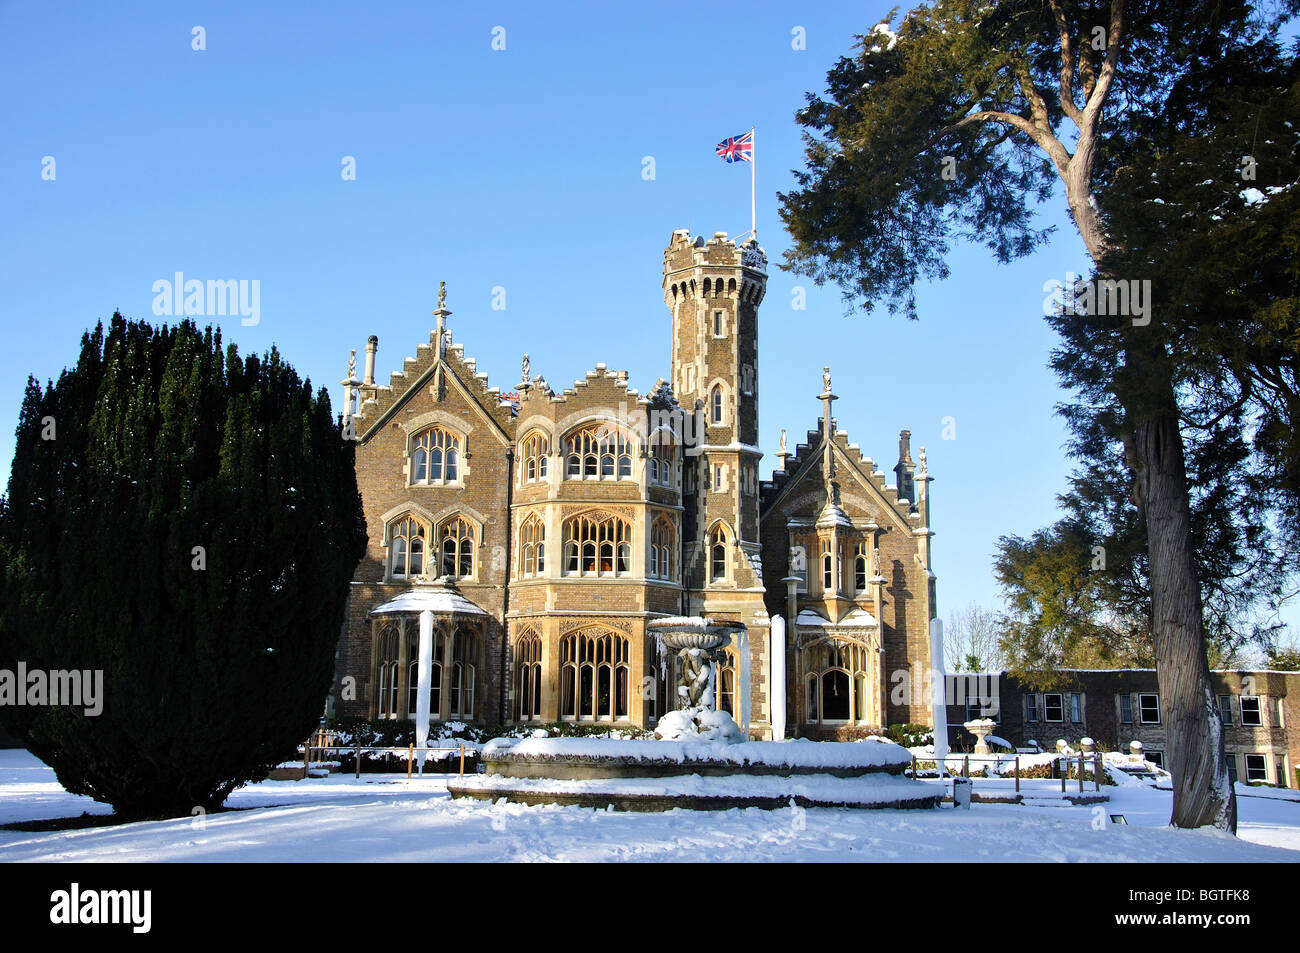 View of frozen fountain and gardens in winter snow, Oakley Court Hotel, Windsor, Berkshire, England, United Kingdom Stock Photo